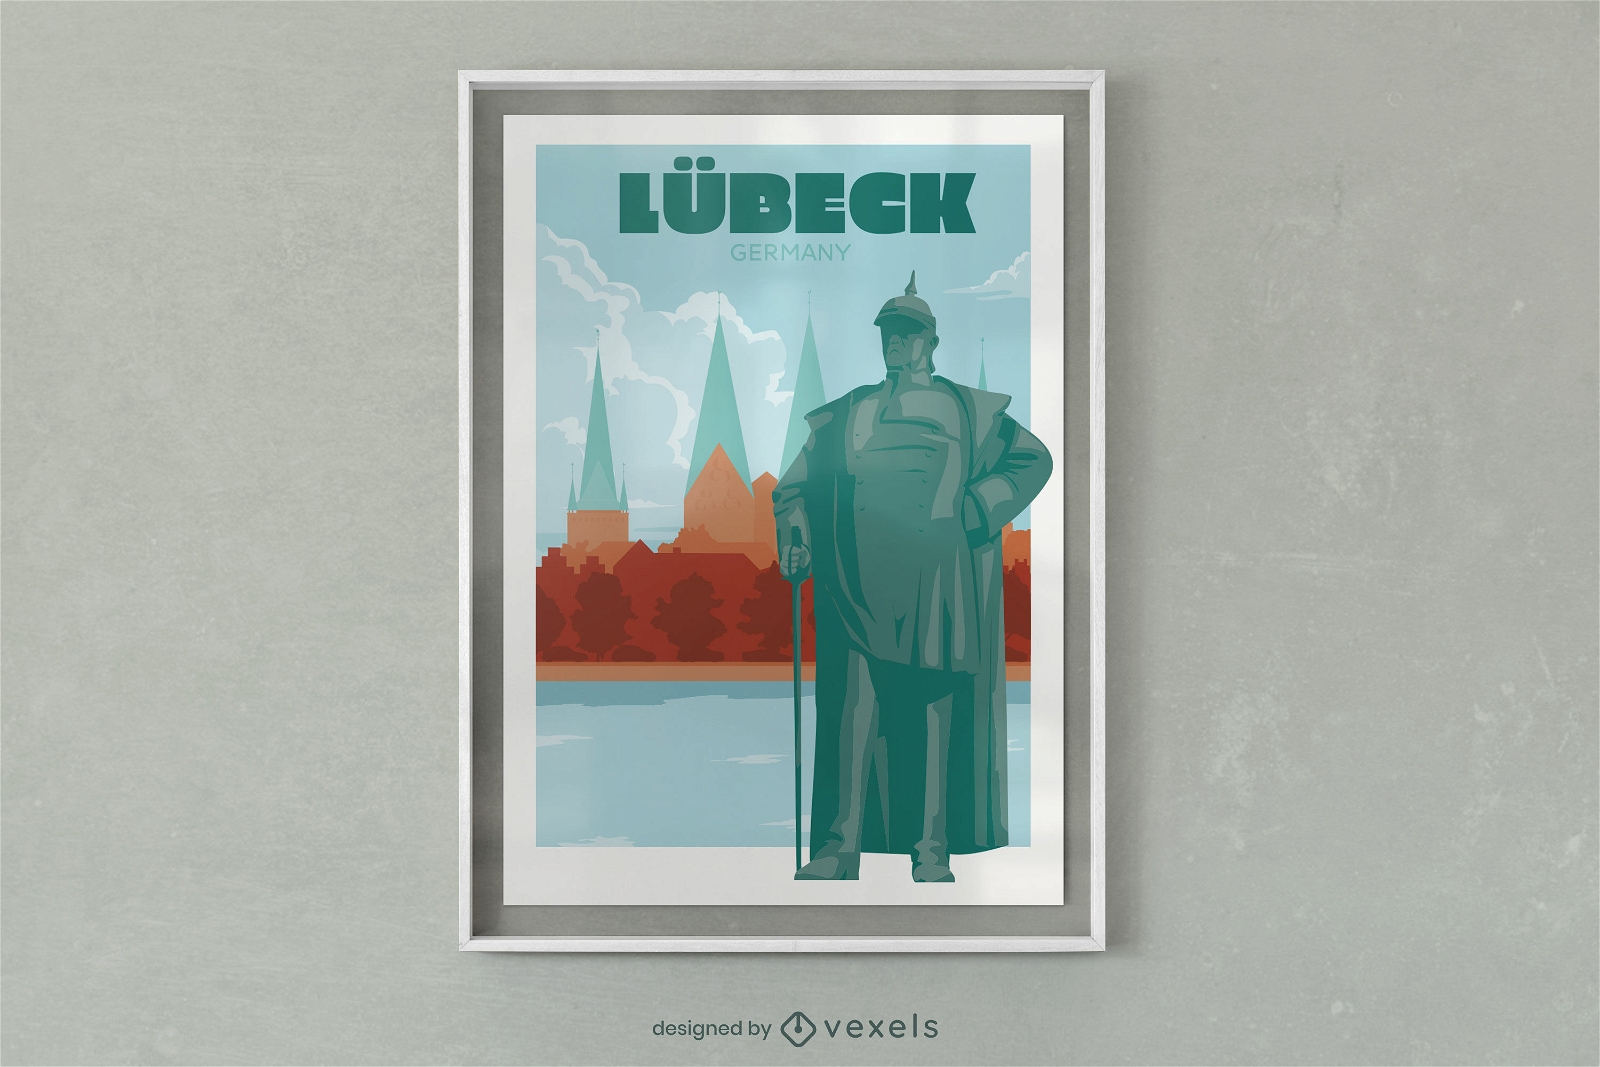 Lubeck city in Germany poster design